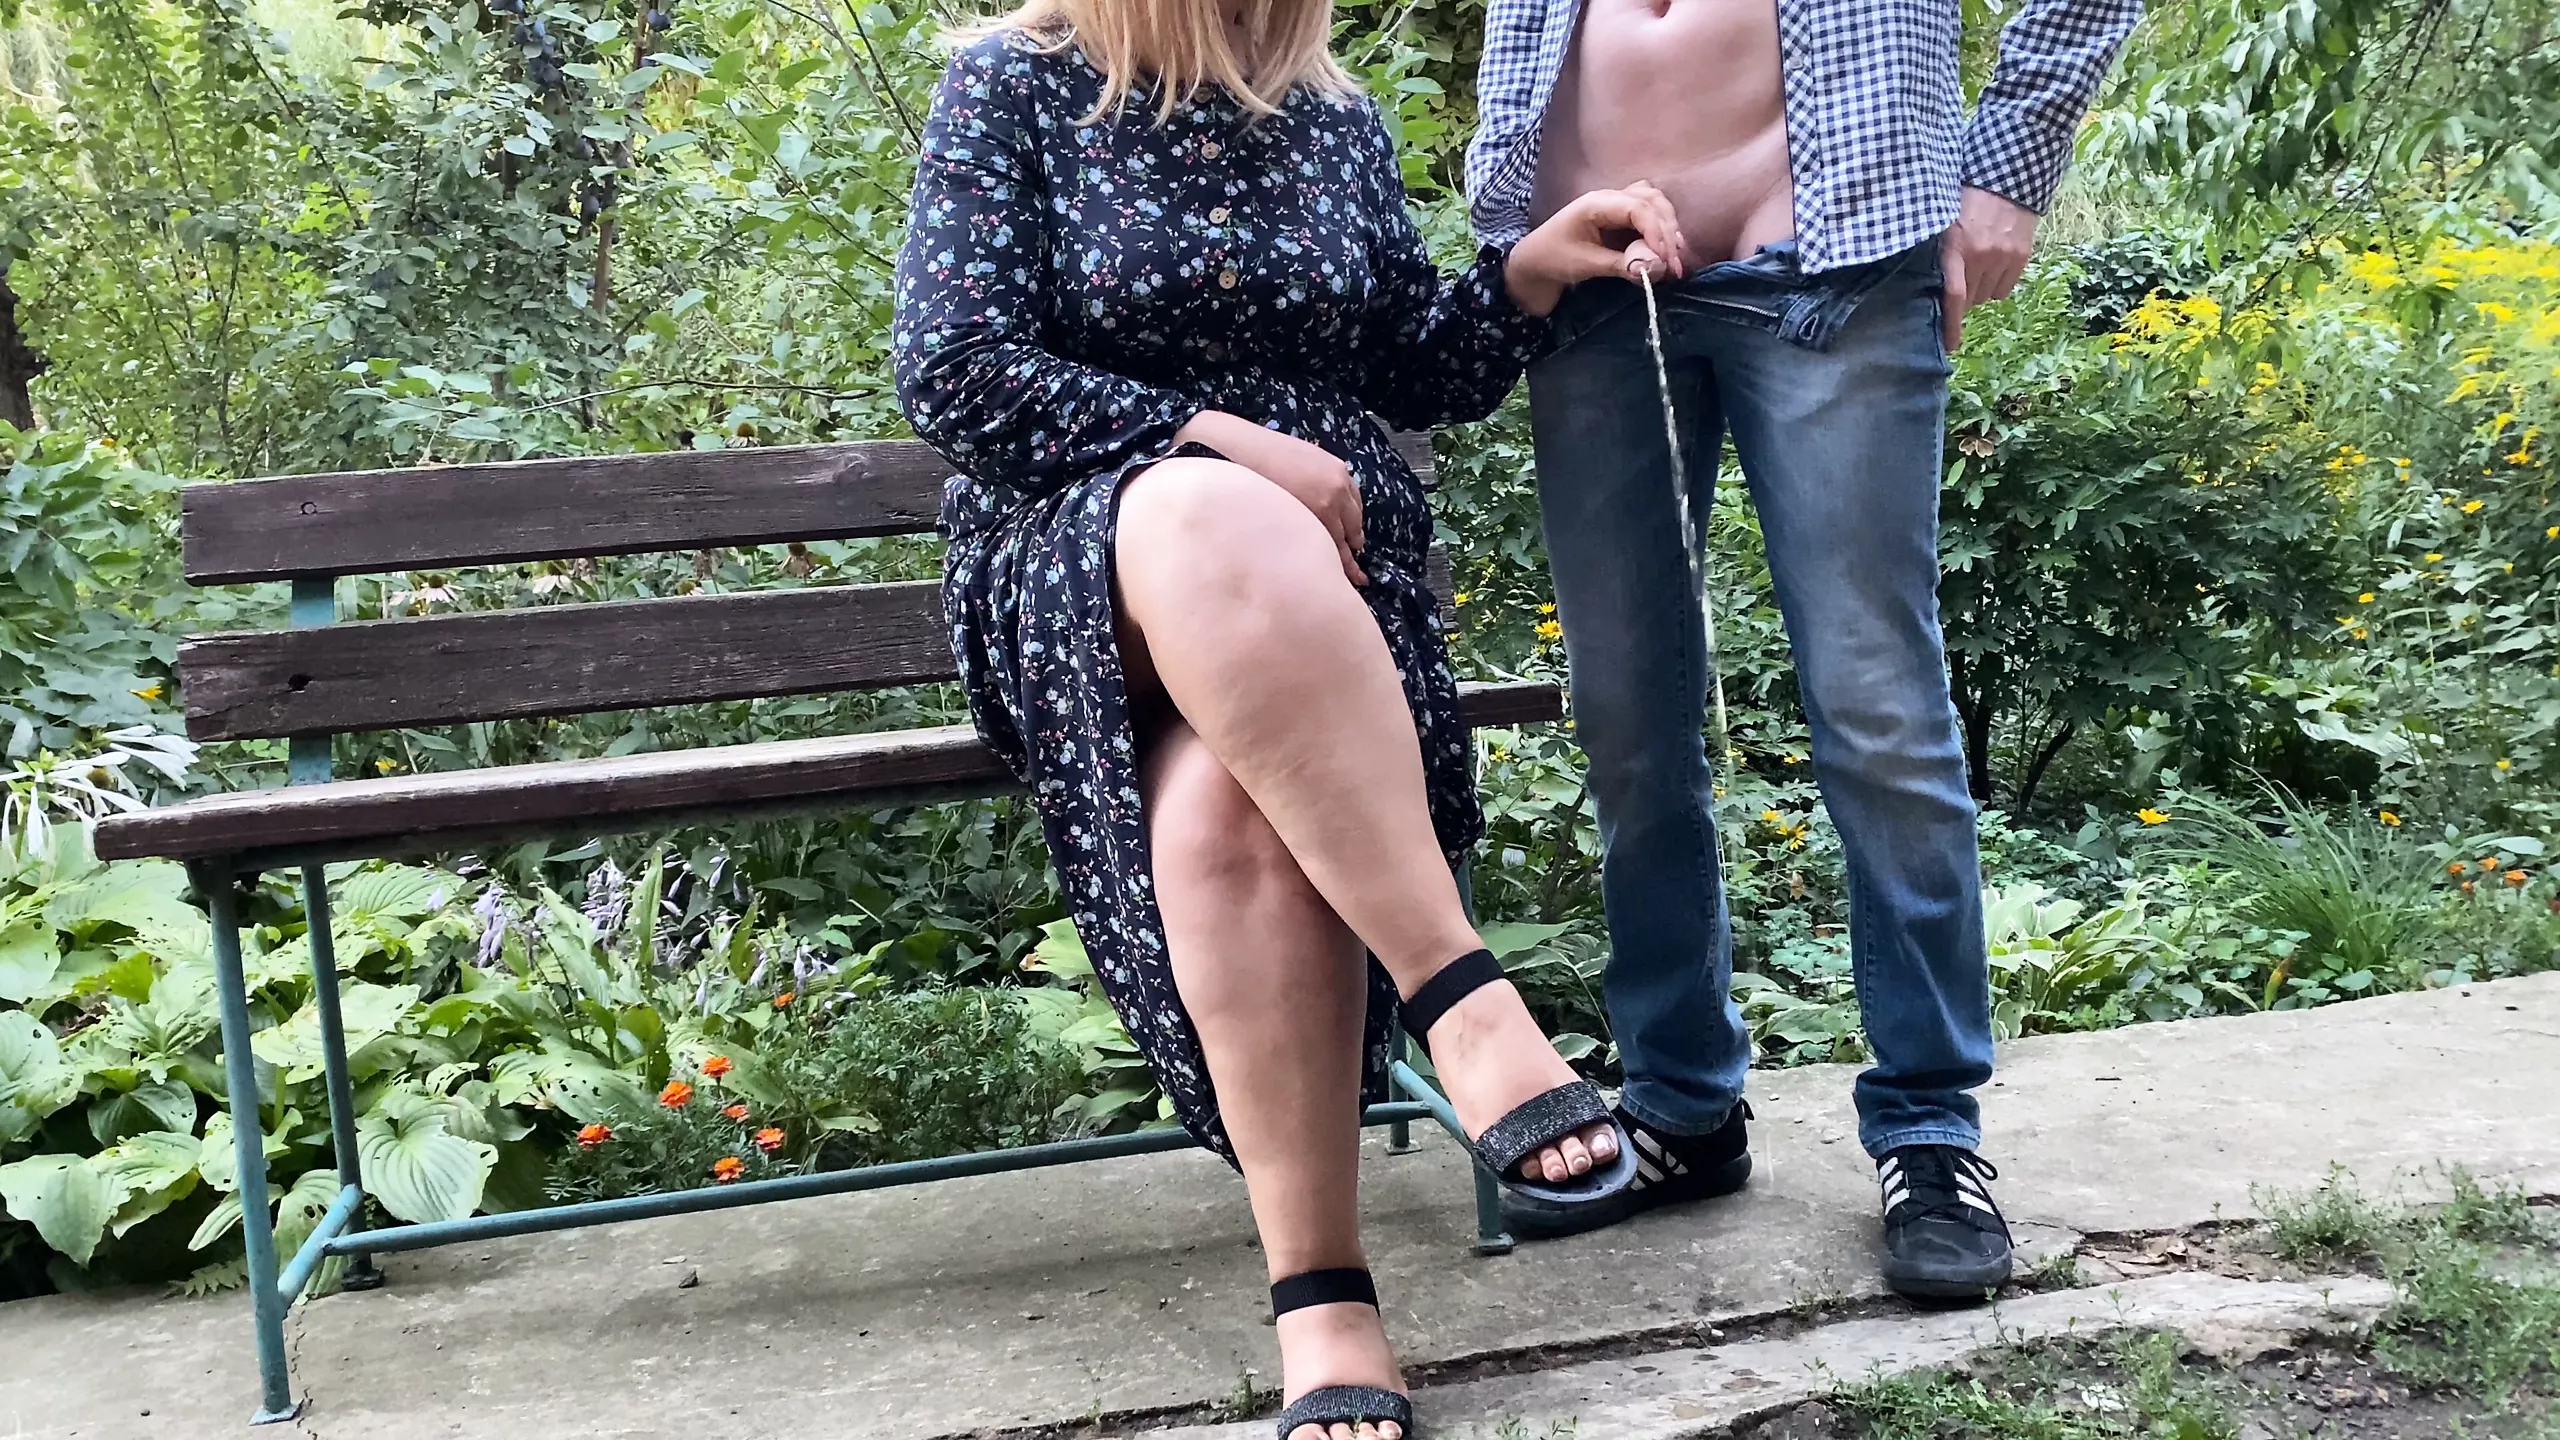 She Holds His Cock While He Pees In The Park